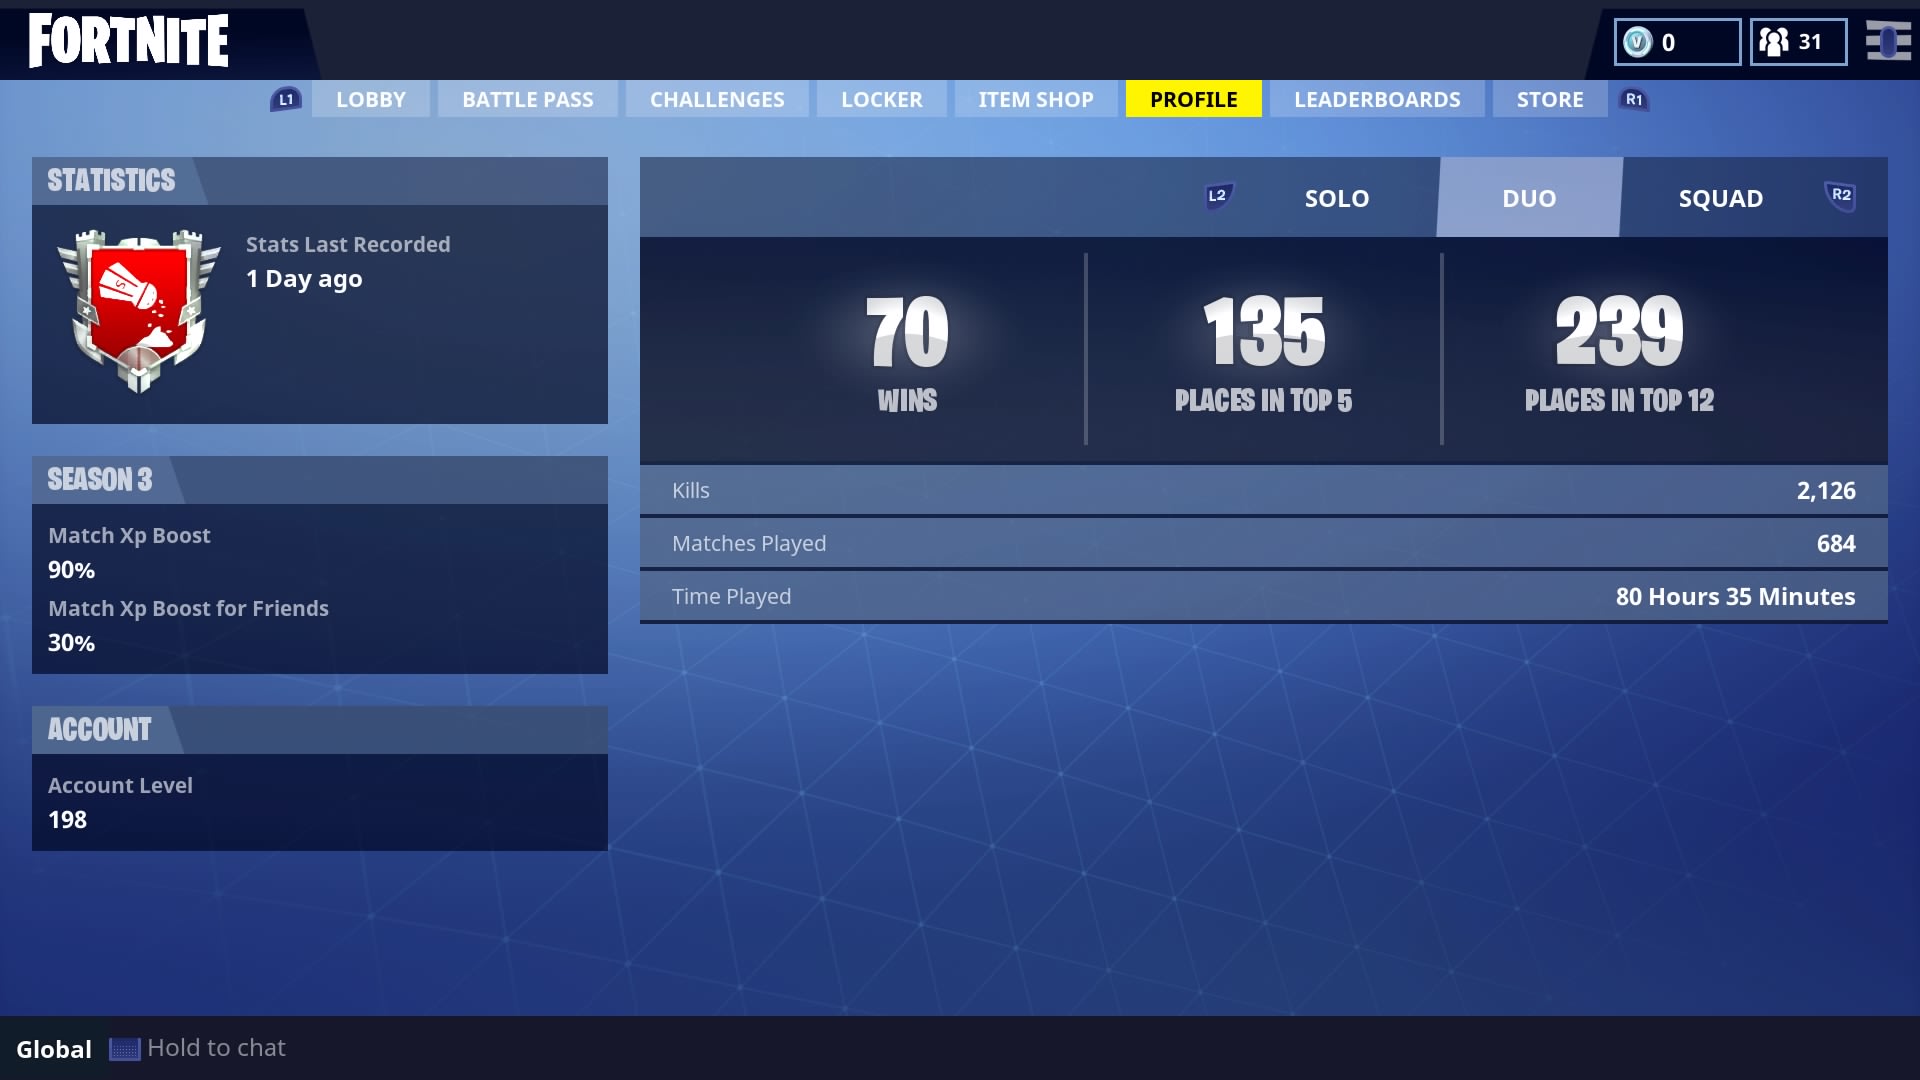 35 Wins In Fortnite Get You A Solo Win On Fortnite Ps4 Only By Thelifeofbishop Fiverr